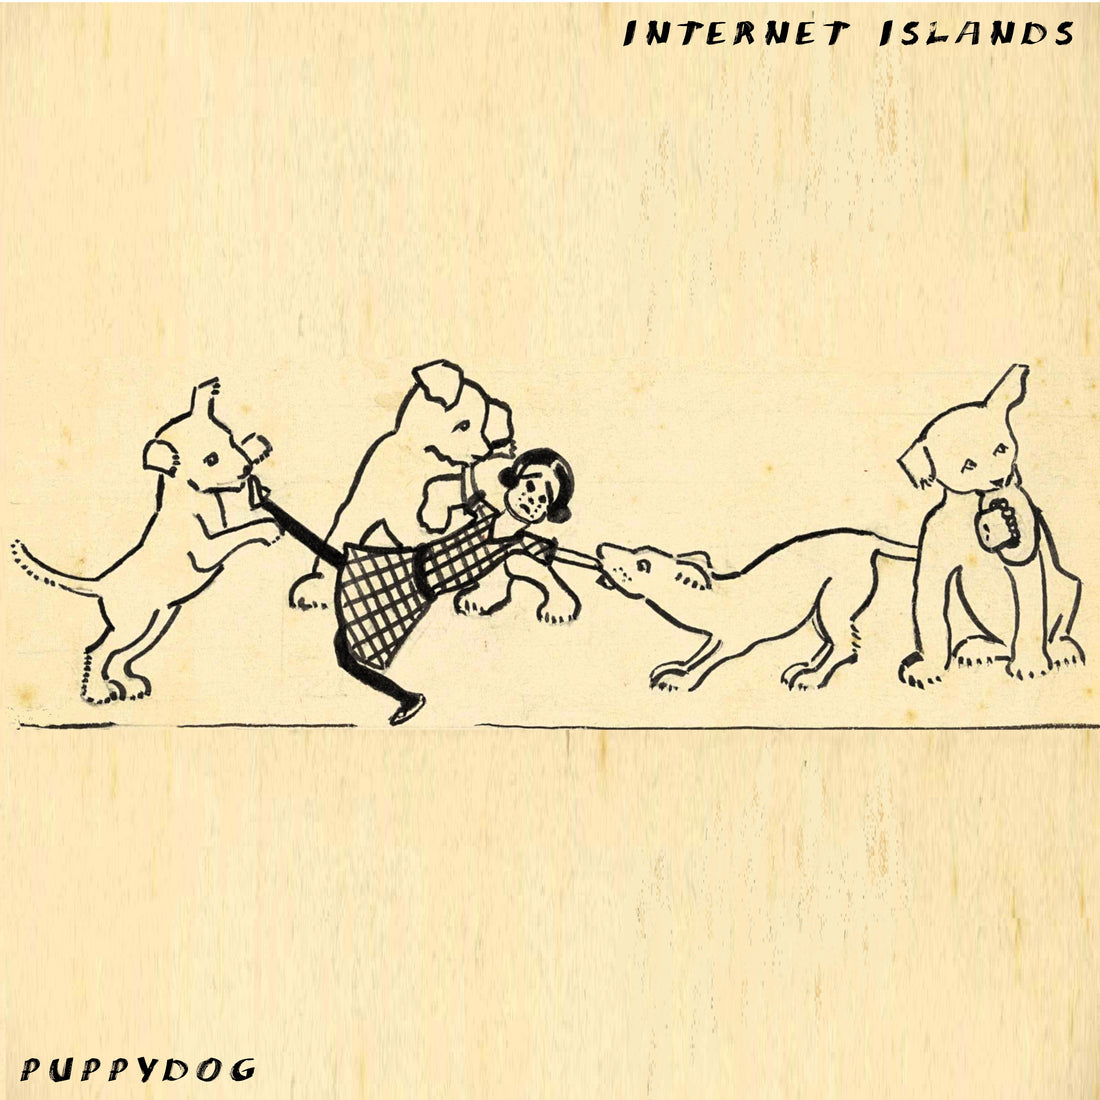 our latest single Puppydog is available on August 4th!